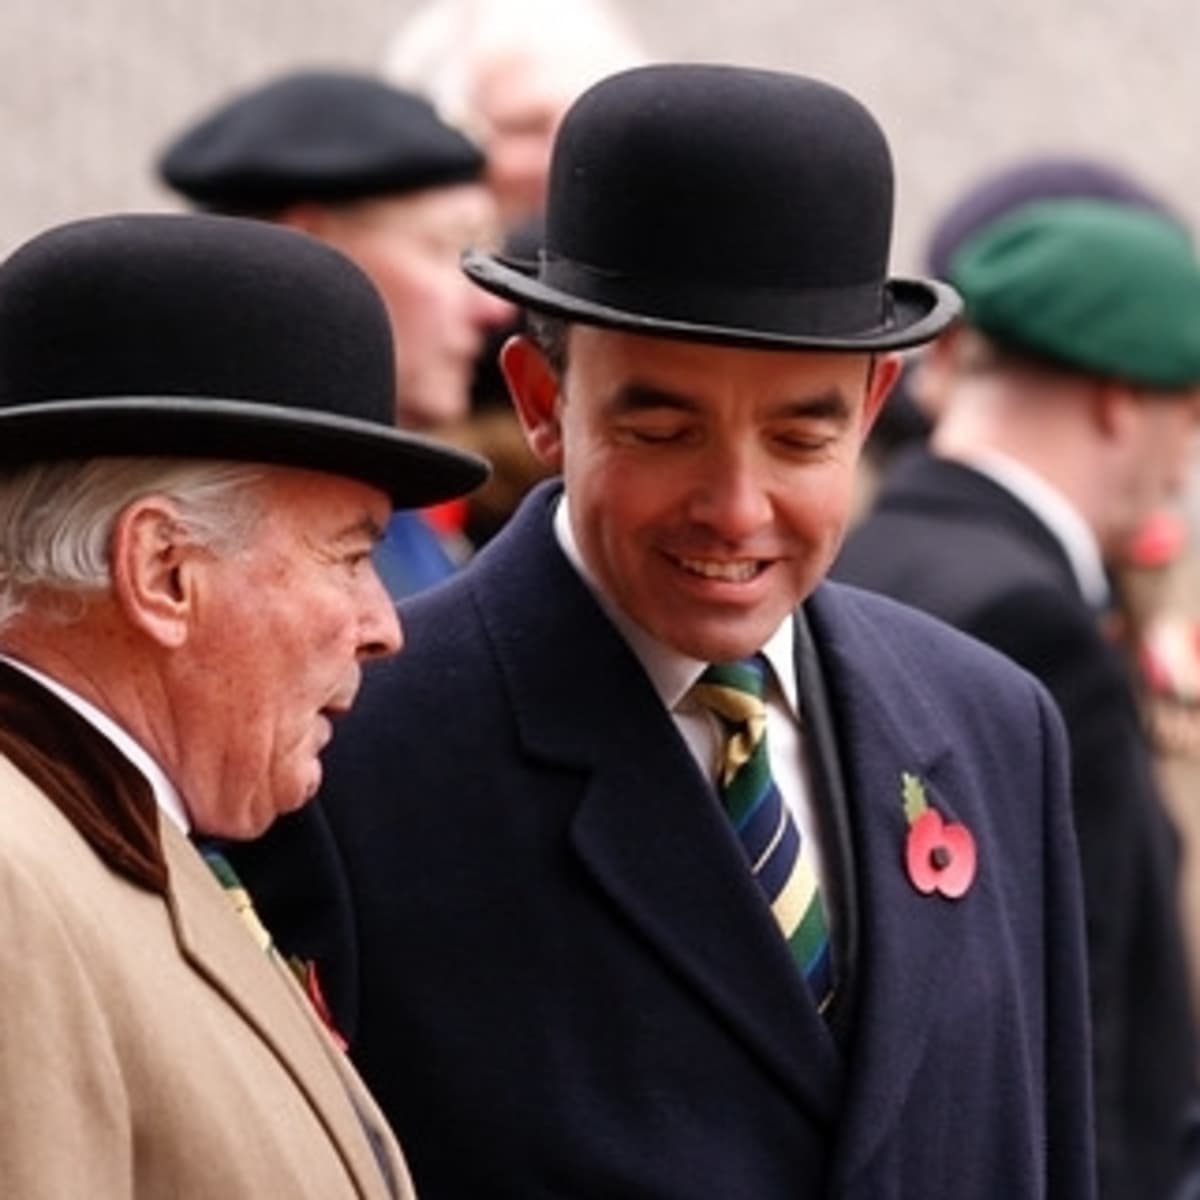 A History of the Bowler Hat - Bellatory